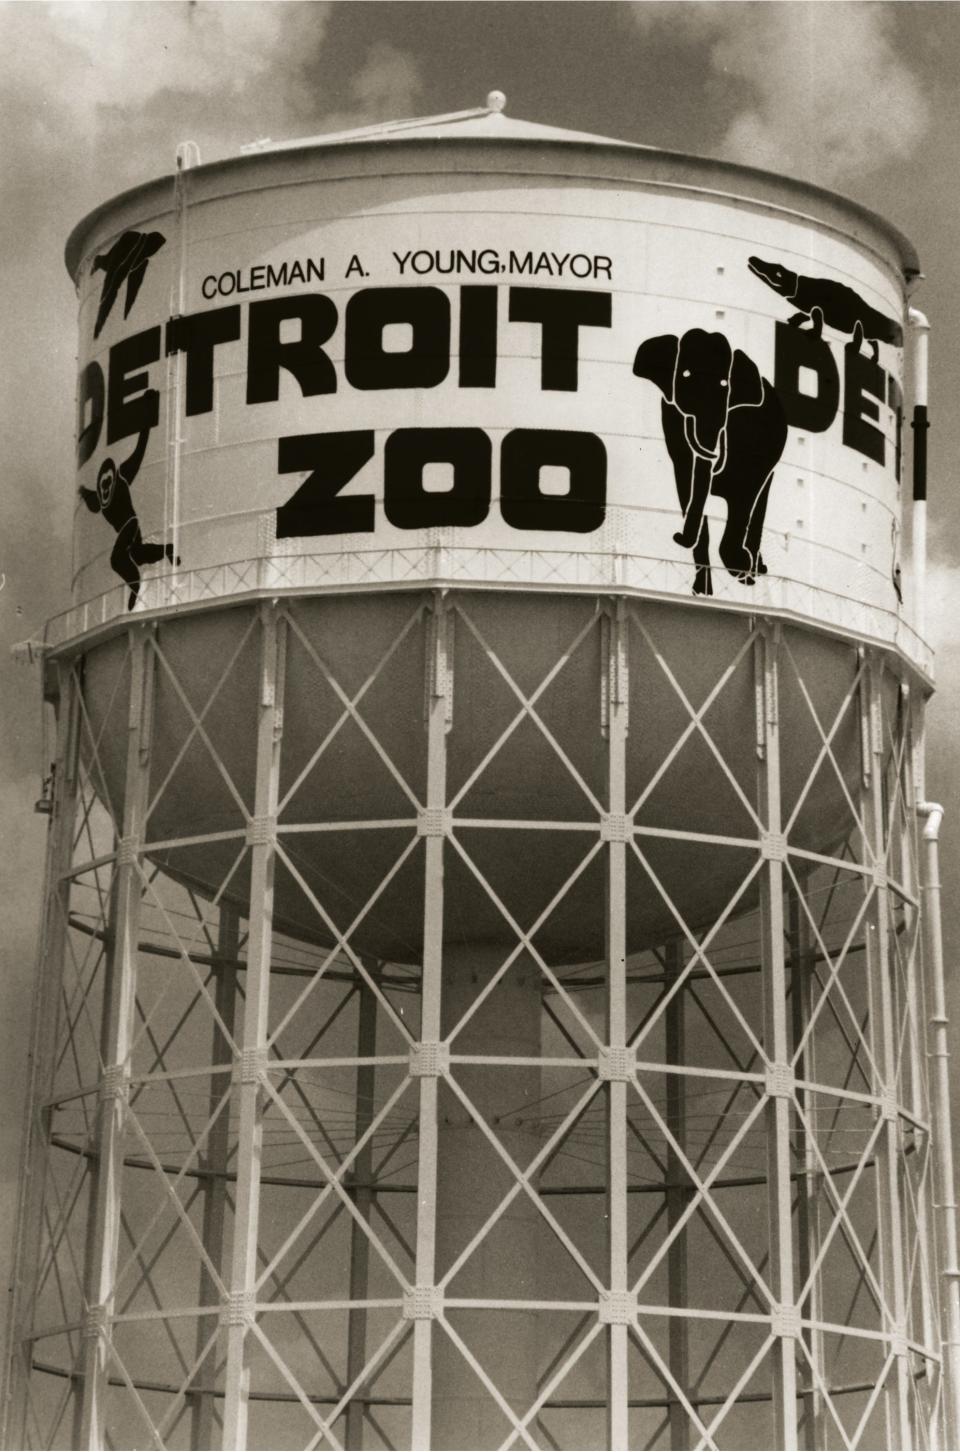 The water tower near the Detroit Zoo in 1986.